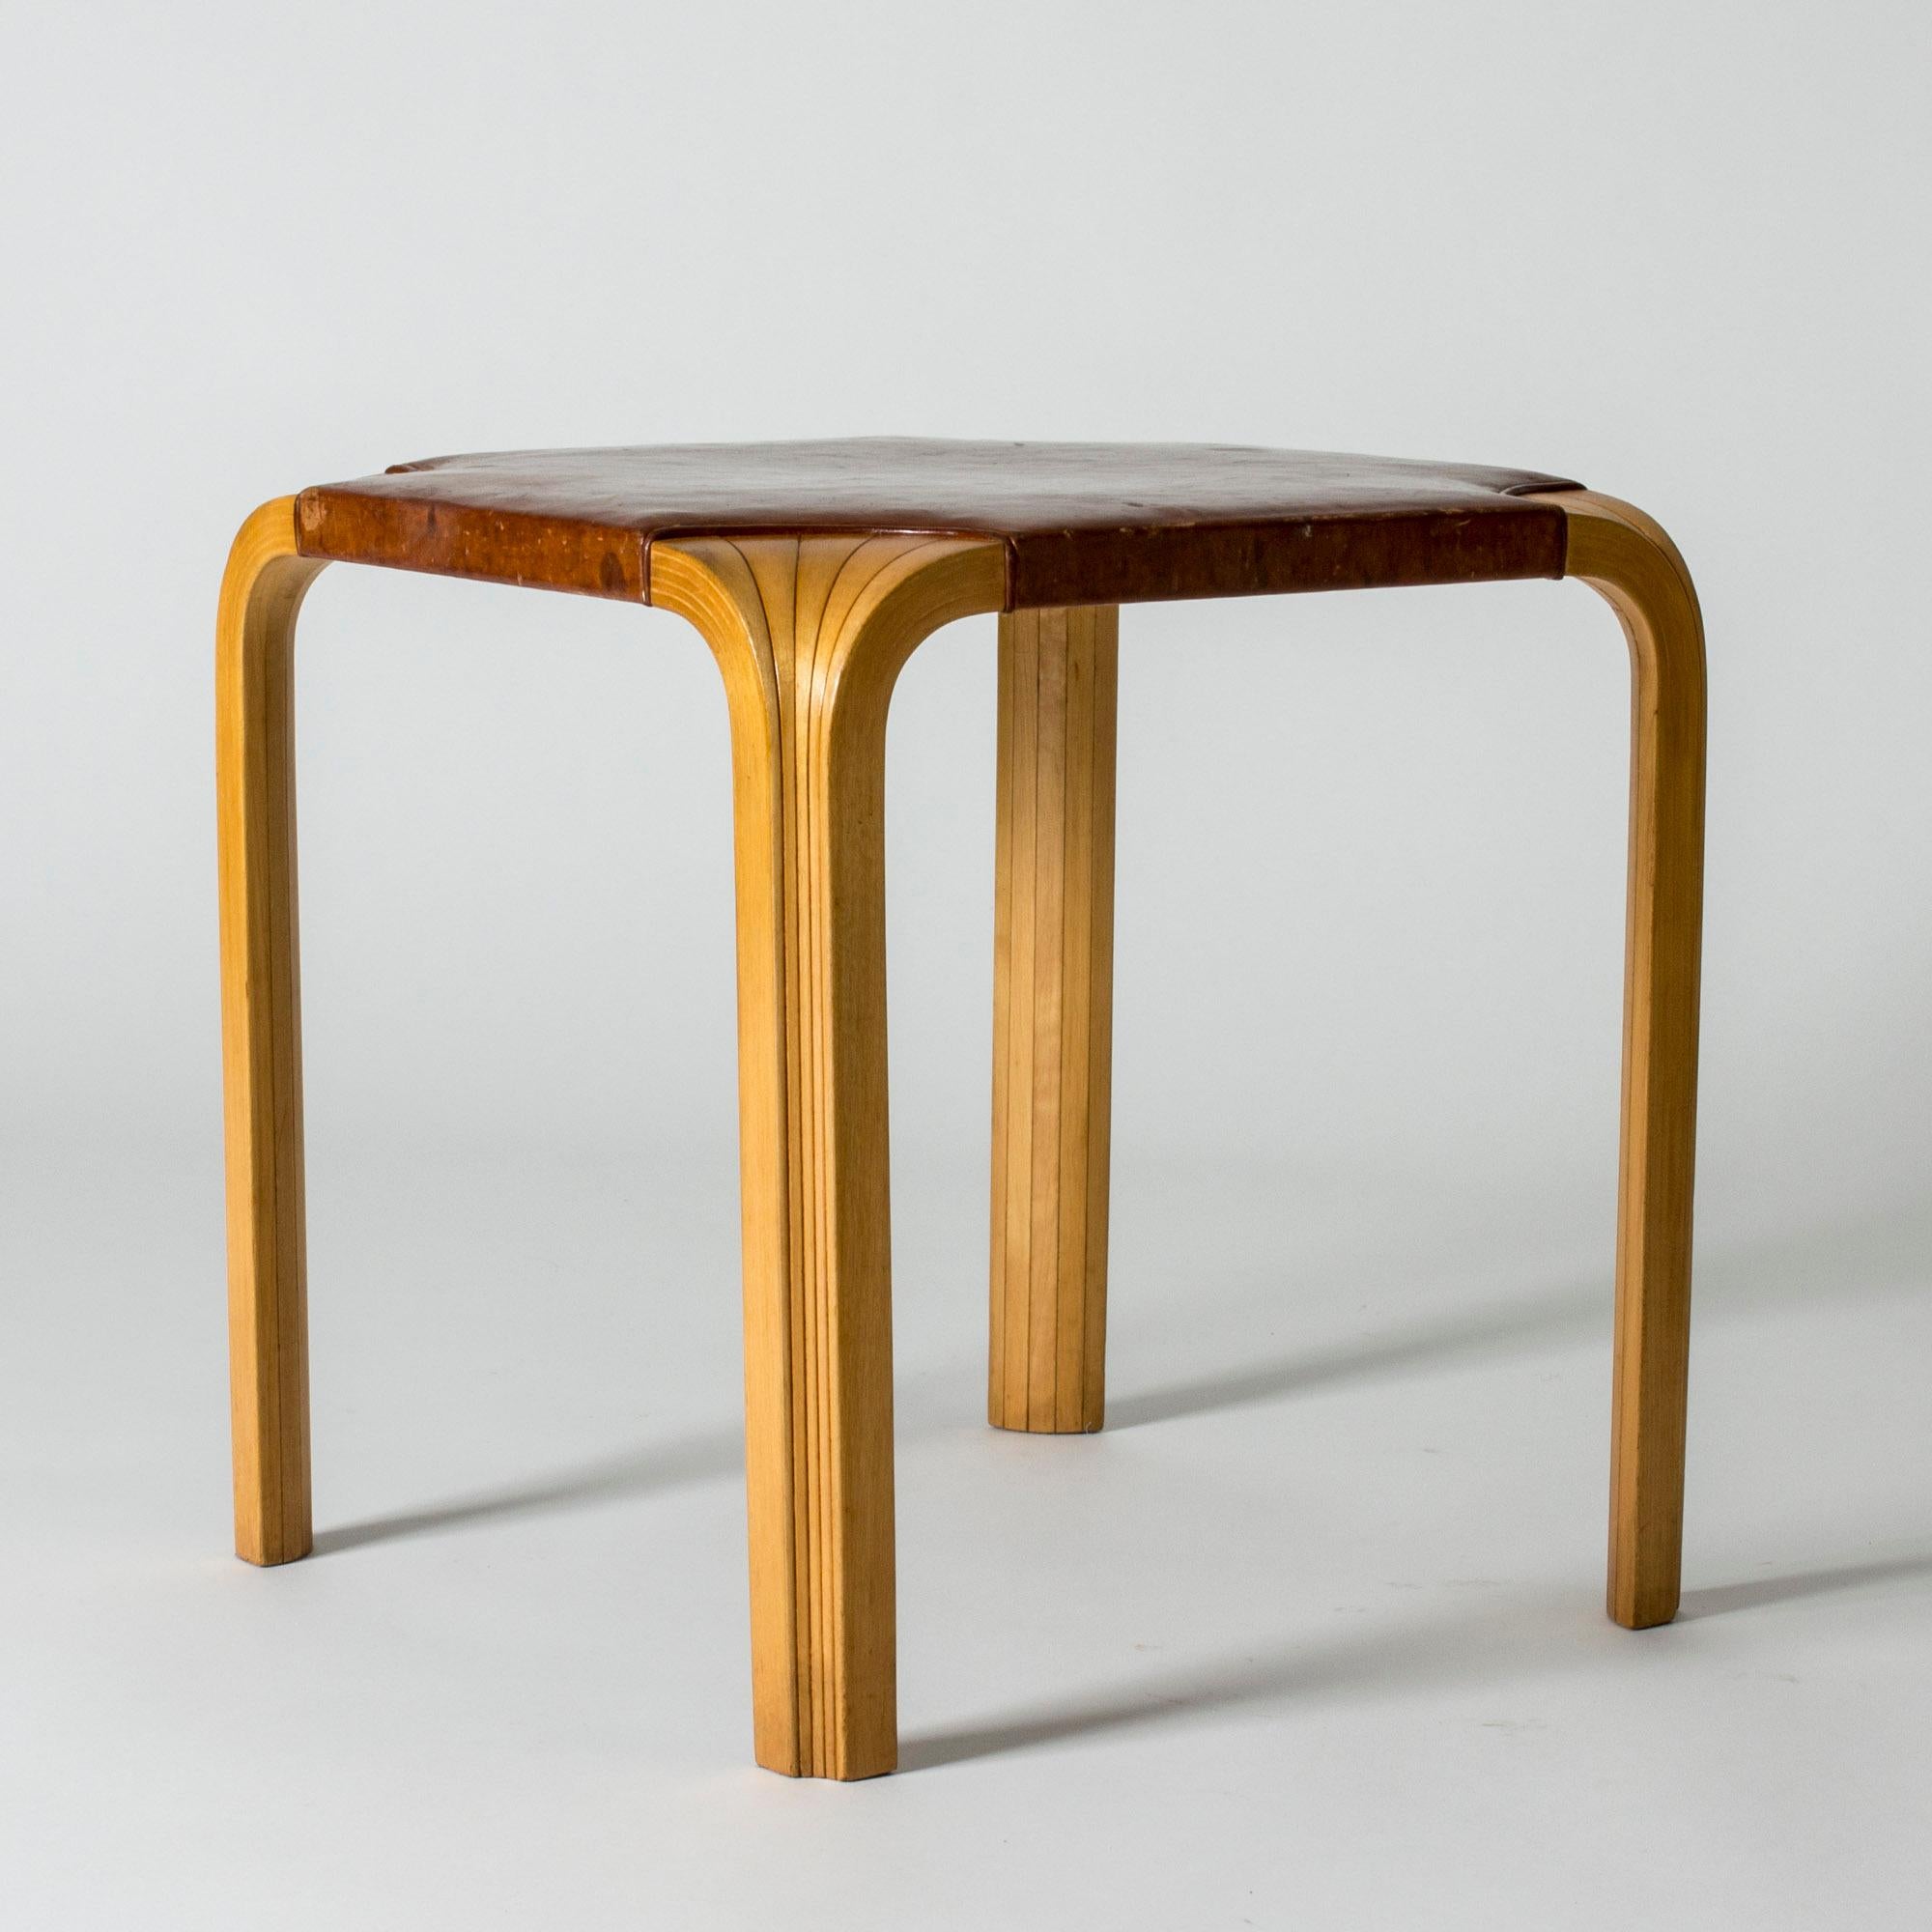 Beautiful stool by Alvar Aalto, model X601, featuring the signature fan design on the legs. Very nicely patinated original, brown leather seat.